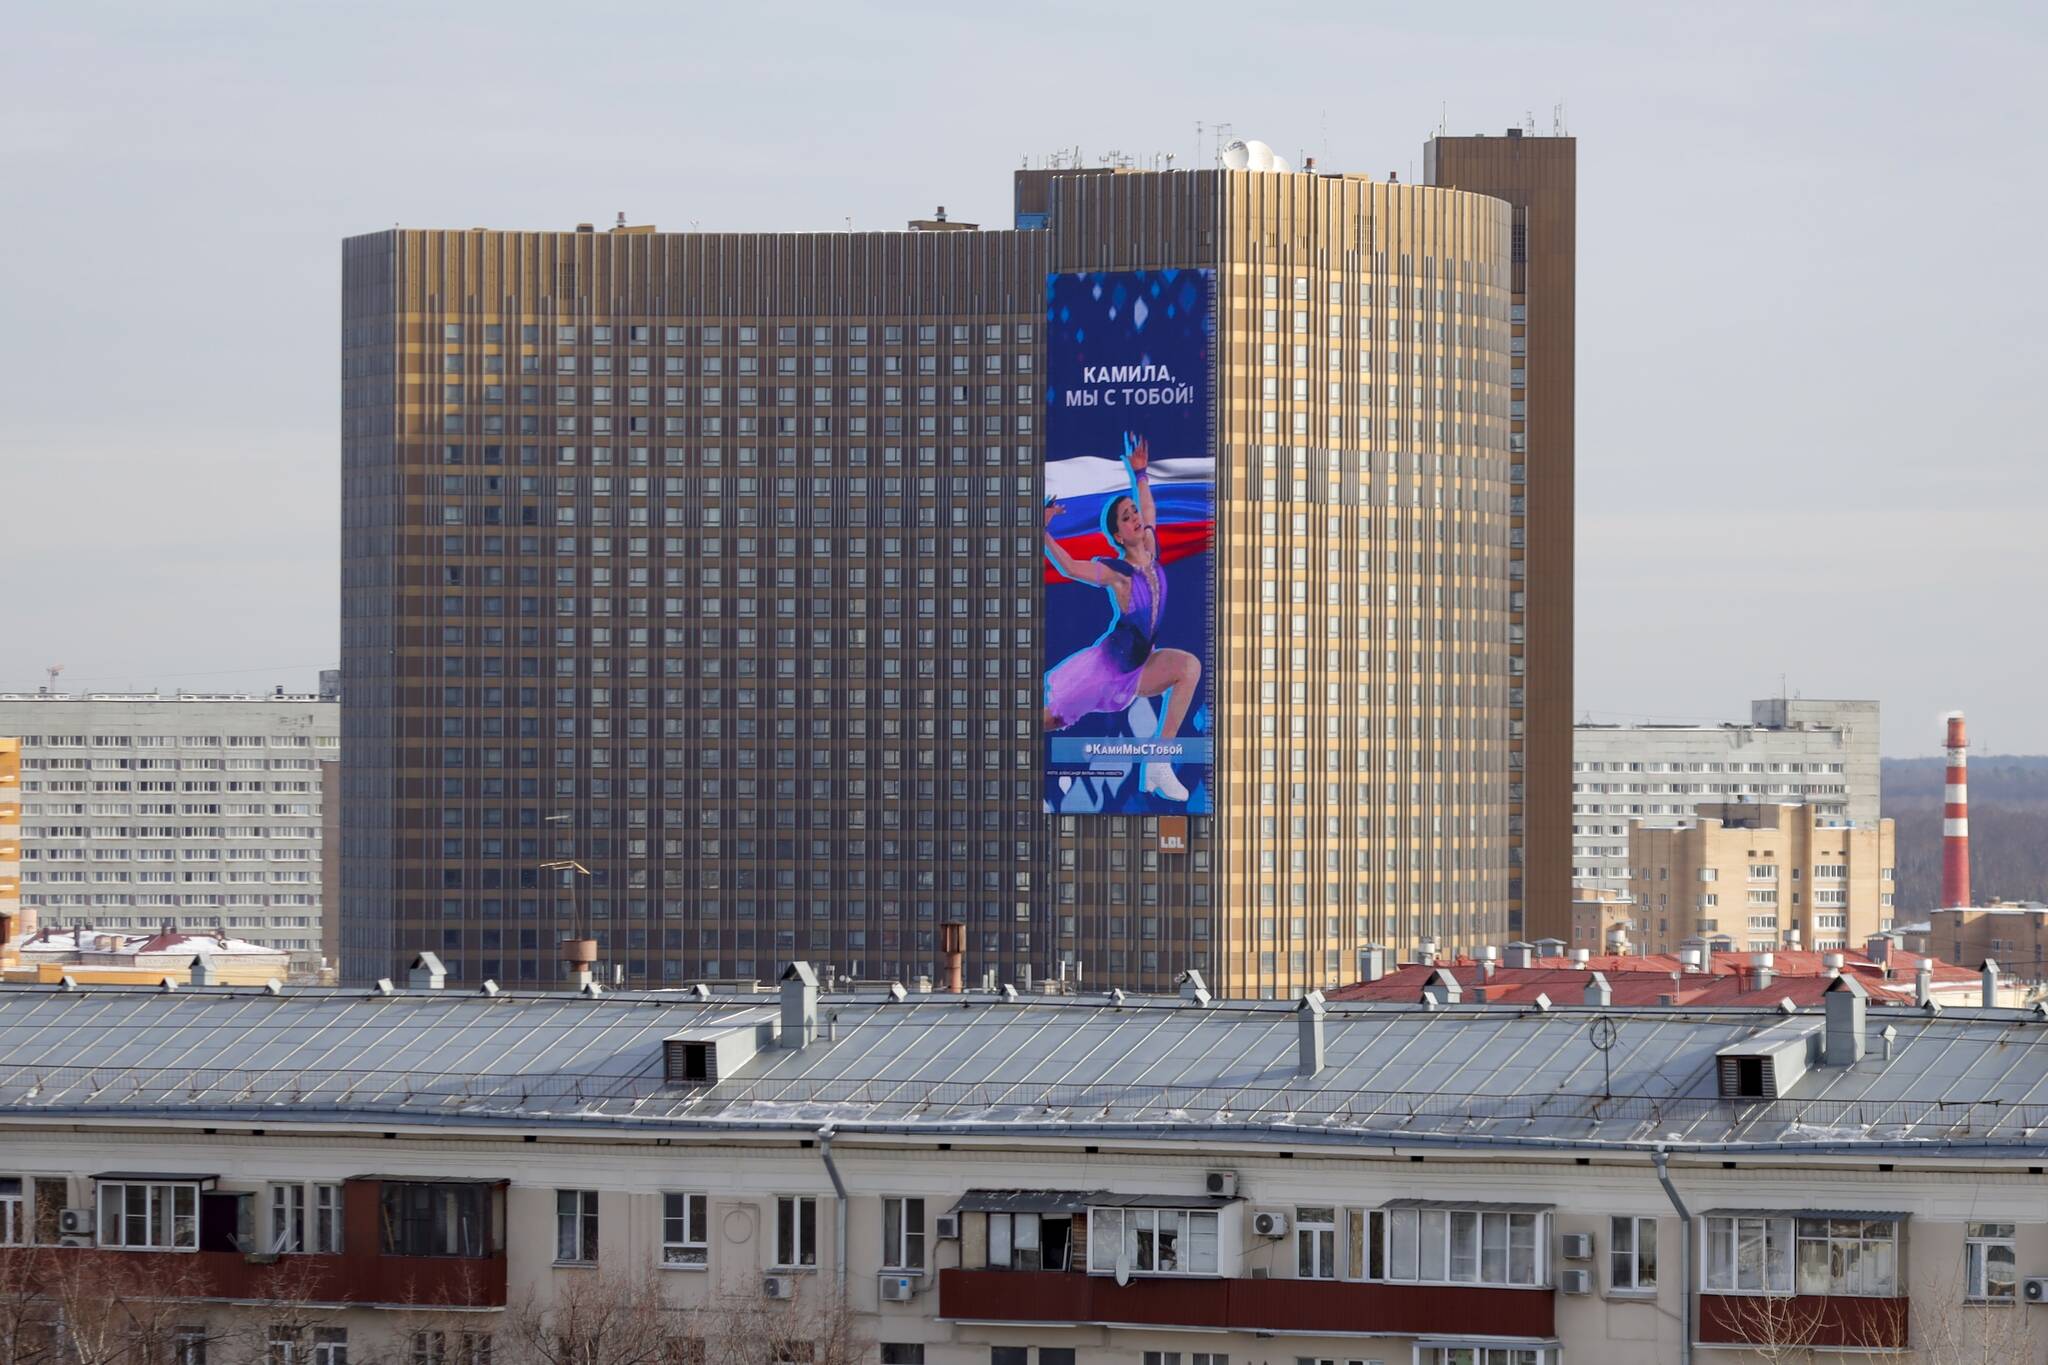 A huge electronic billboard shows a photo of Kamila Valieva with words “Kamila, we are with you” on the building of the Cosmos hotel in Moscow, Russia, Monday, Feb. 14, 2022. Russian teenager Kamila Valieva was cleared to compete in the women’s figure skating competition at the Winter Olympics despite failing a pre-Games drug test. (AP Photo/Alexander Zemlianichenko Jr)